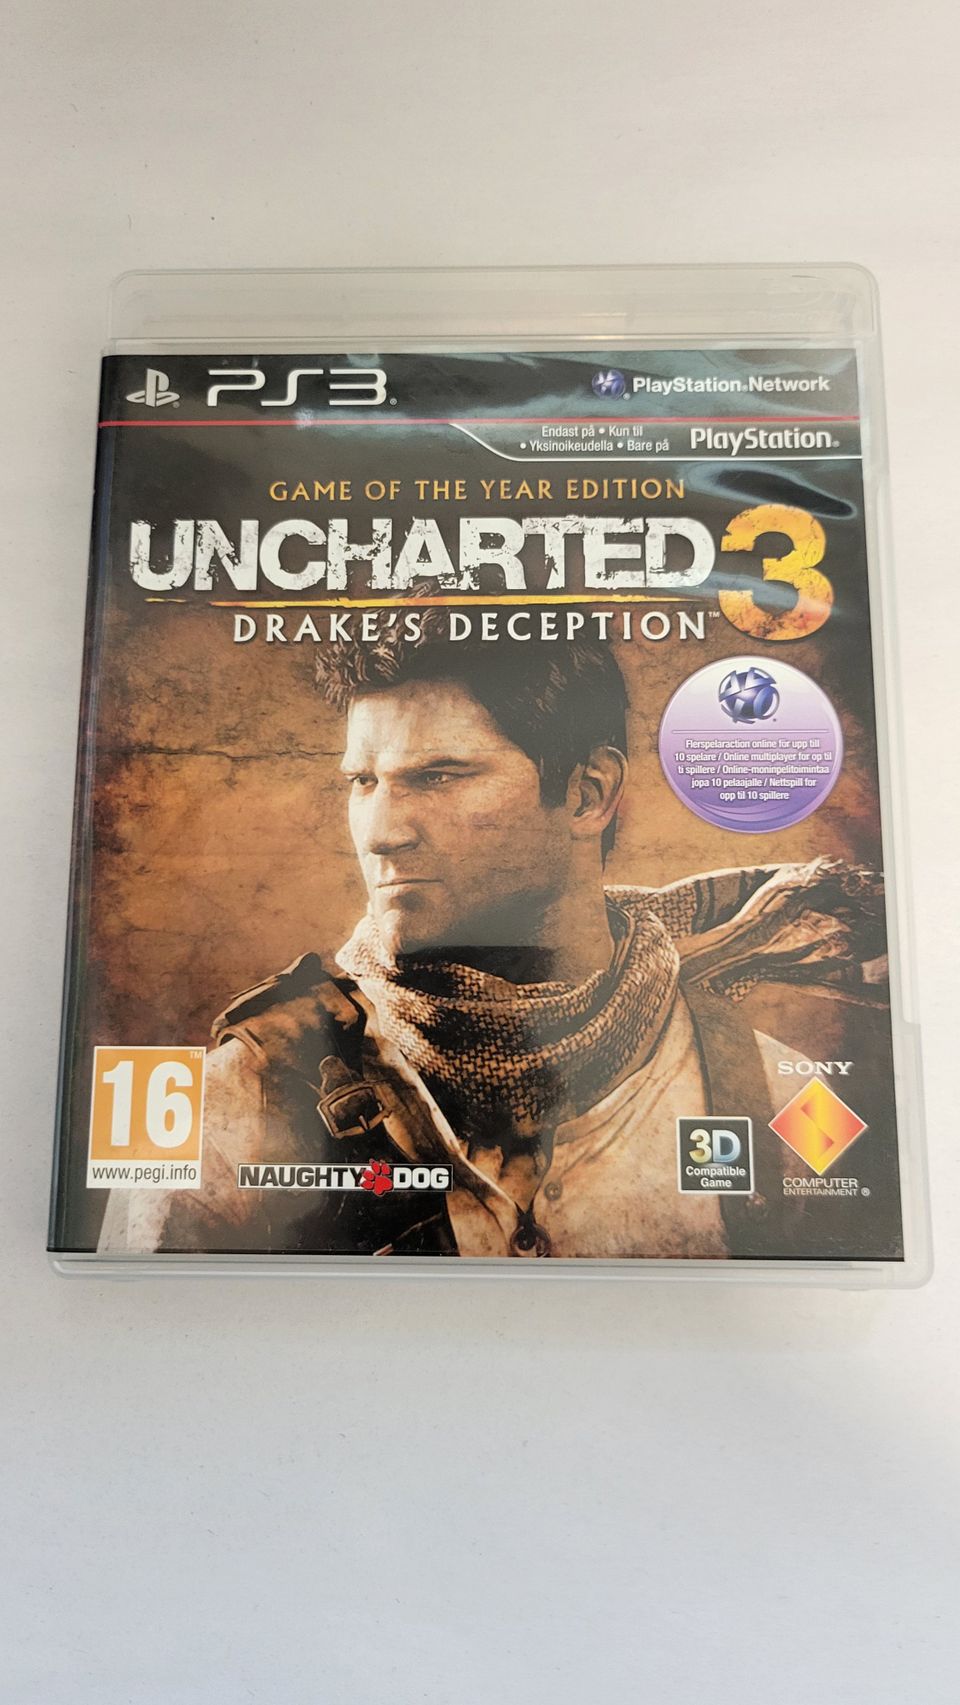 Ps3 Uncharted 3 Drake deception